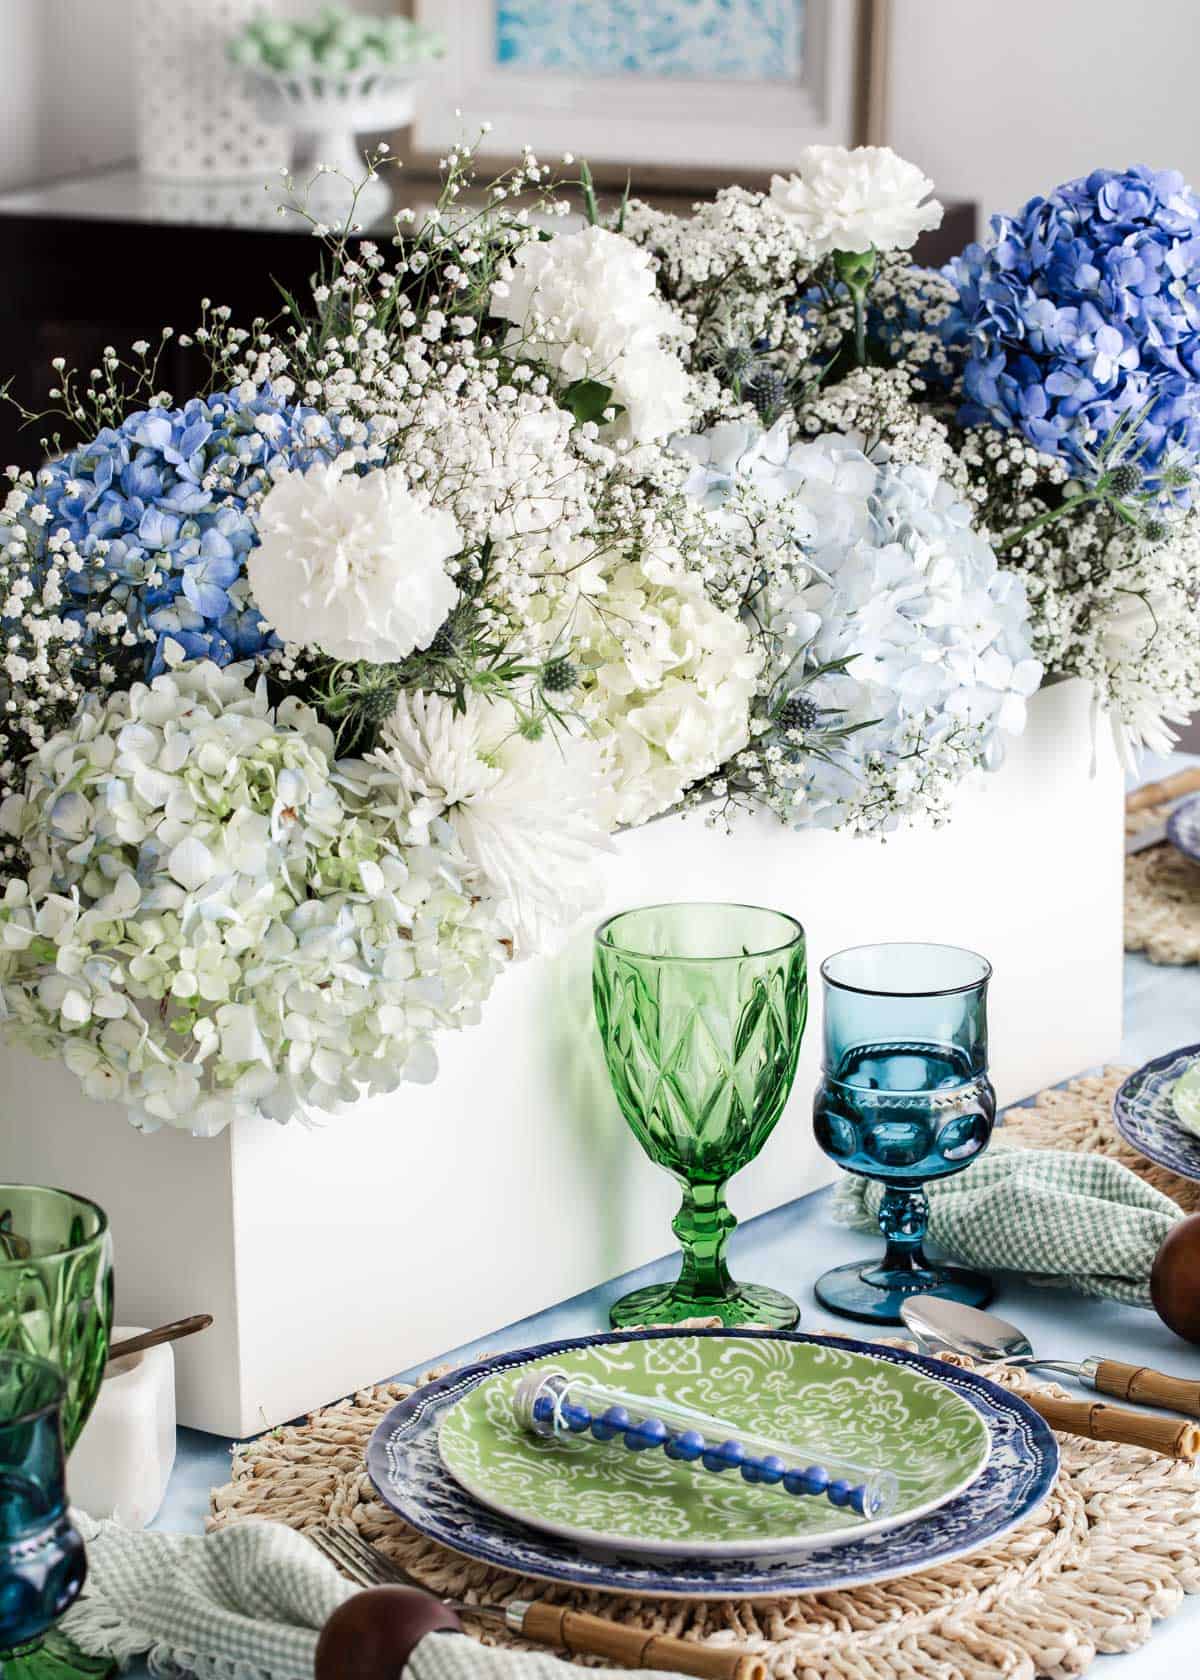 large white flower box centerpiece with blue hydrangeas and white flowers, on tablescape.